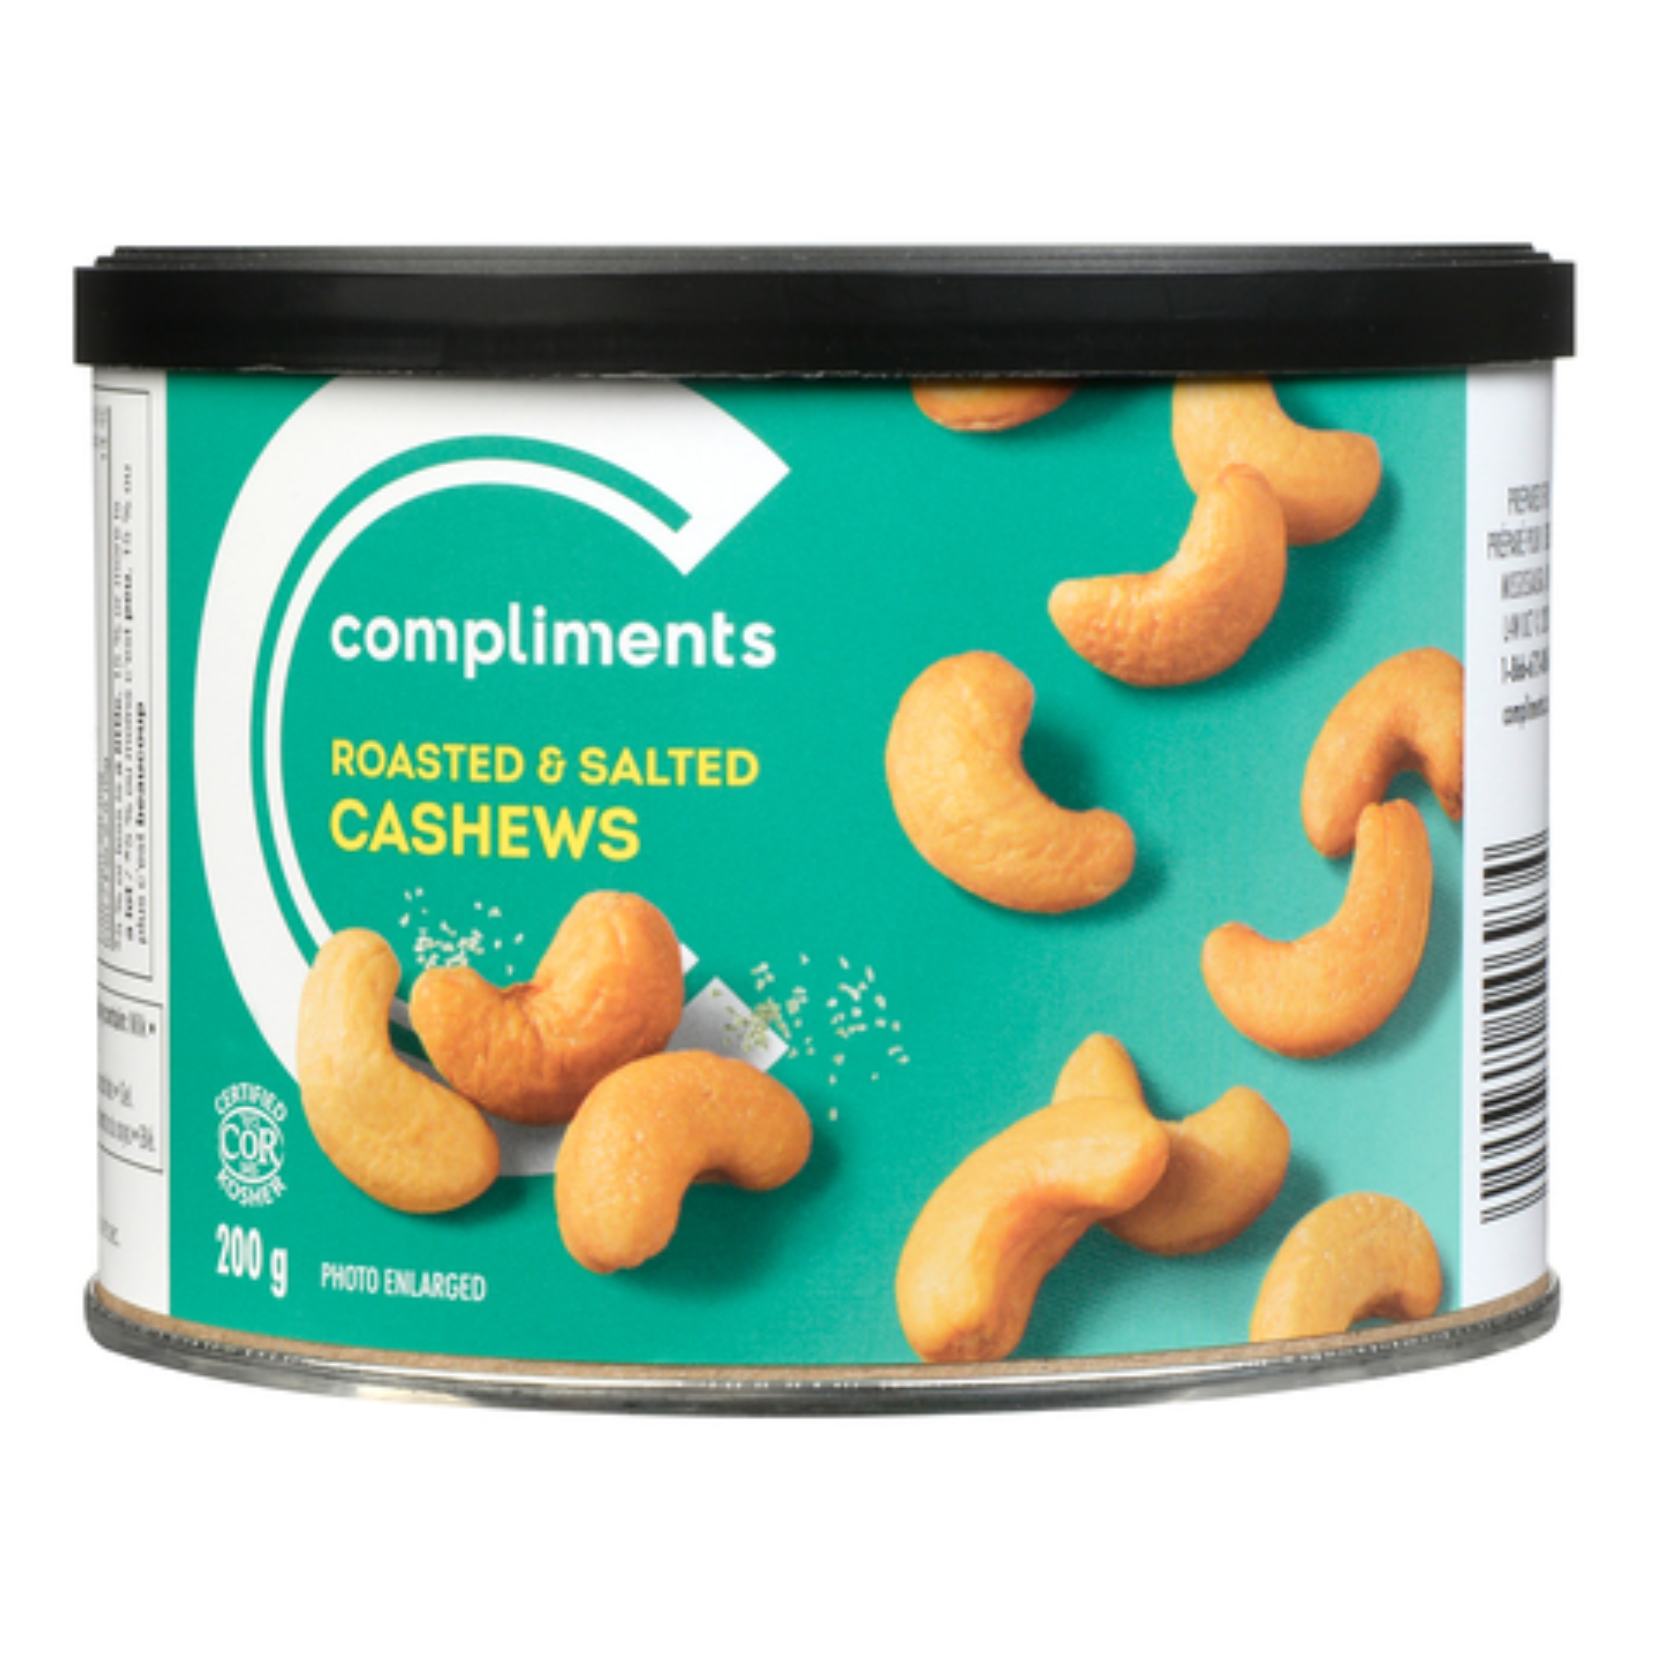 Compliments Roasted & Salted Cashews 200g